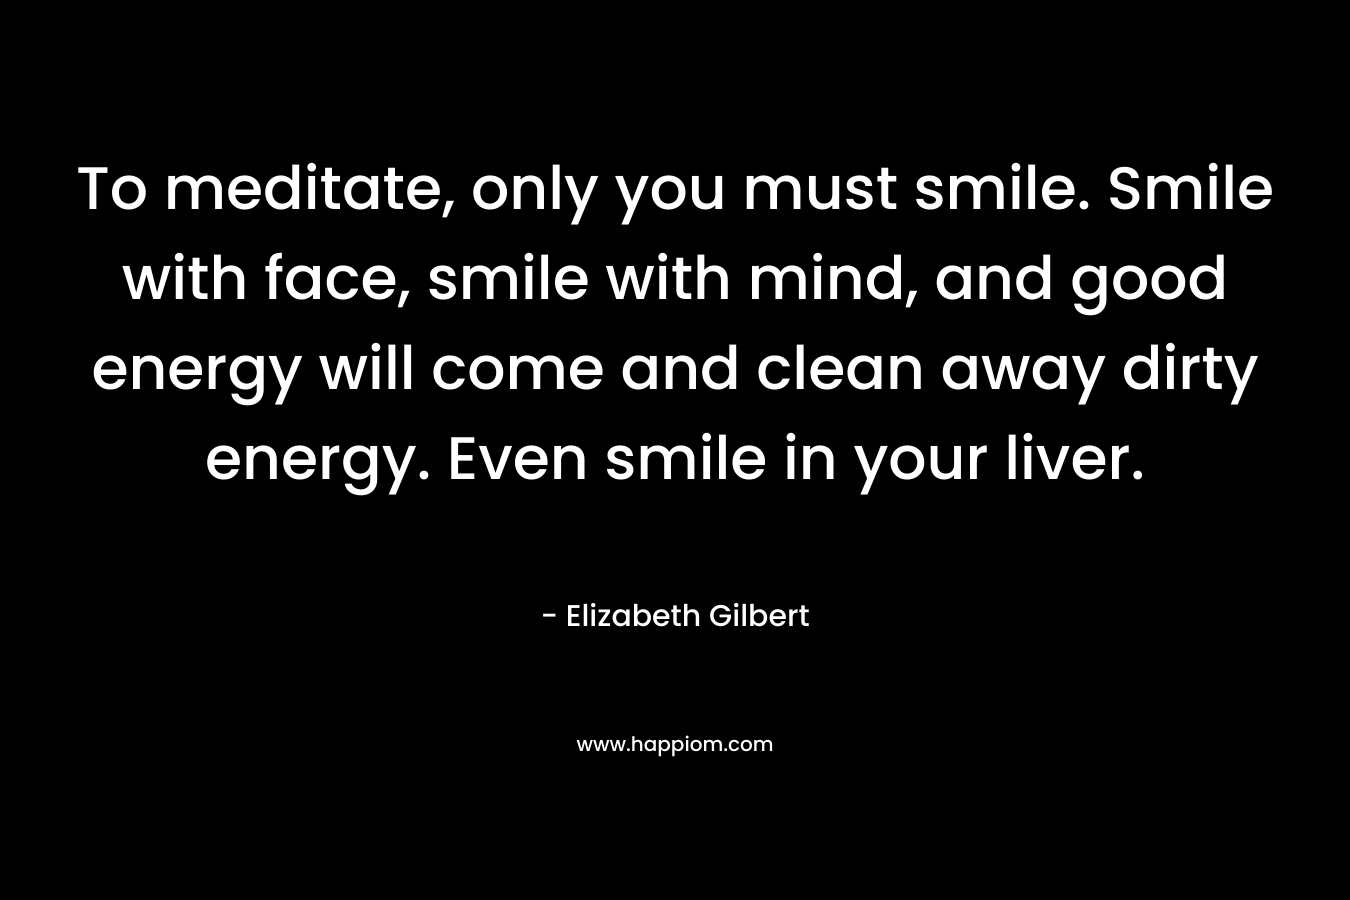 To meditate, only you must smile. Smile with face, smile with mind, and good energy will come and clean away dirty energy. Even smile in your liver.